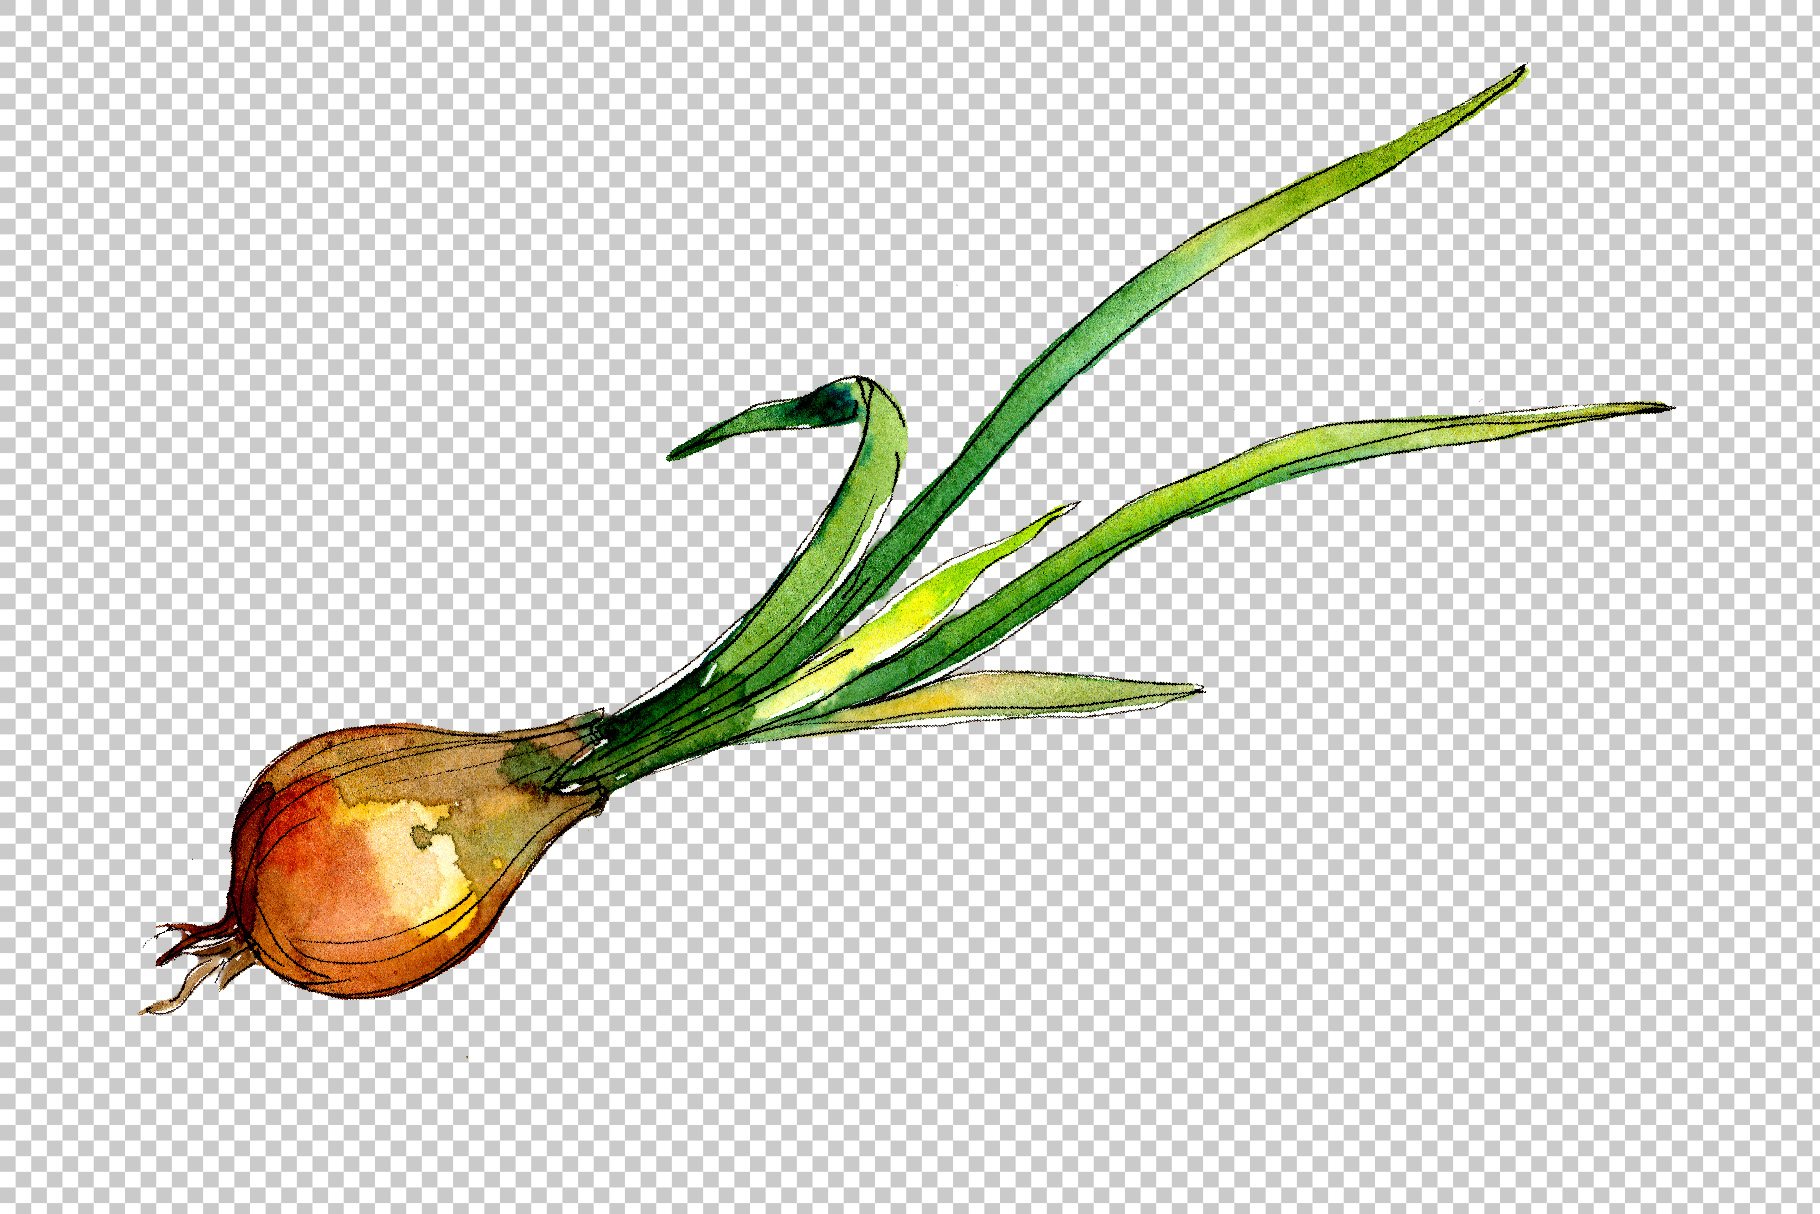 Little young onion.